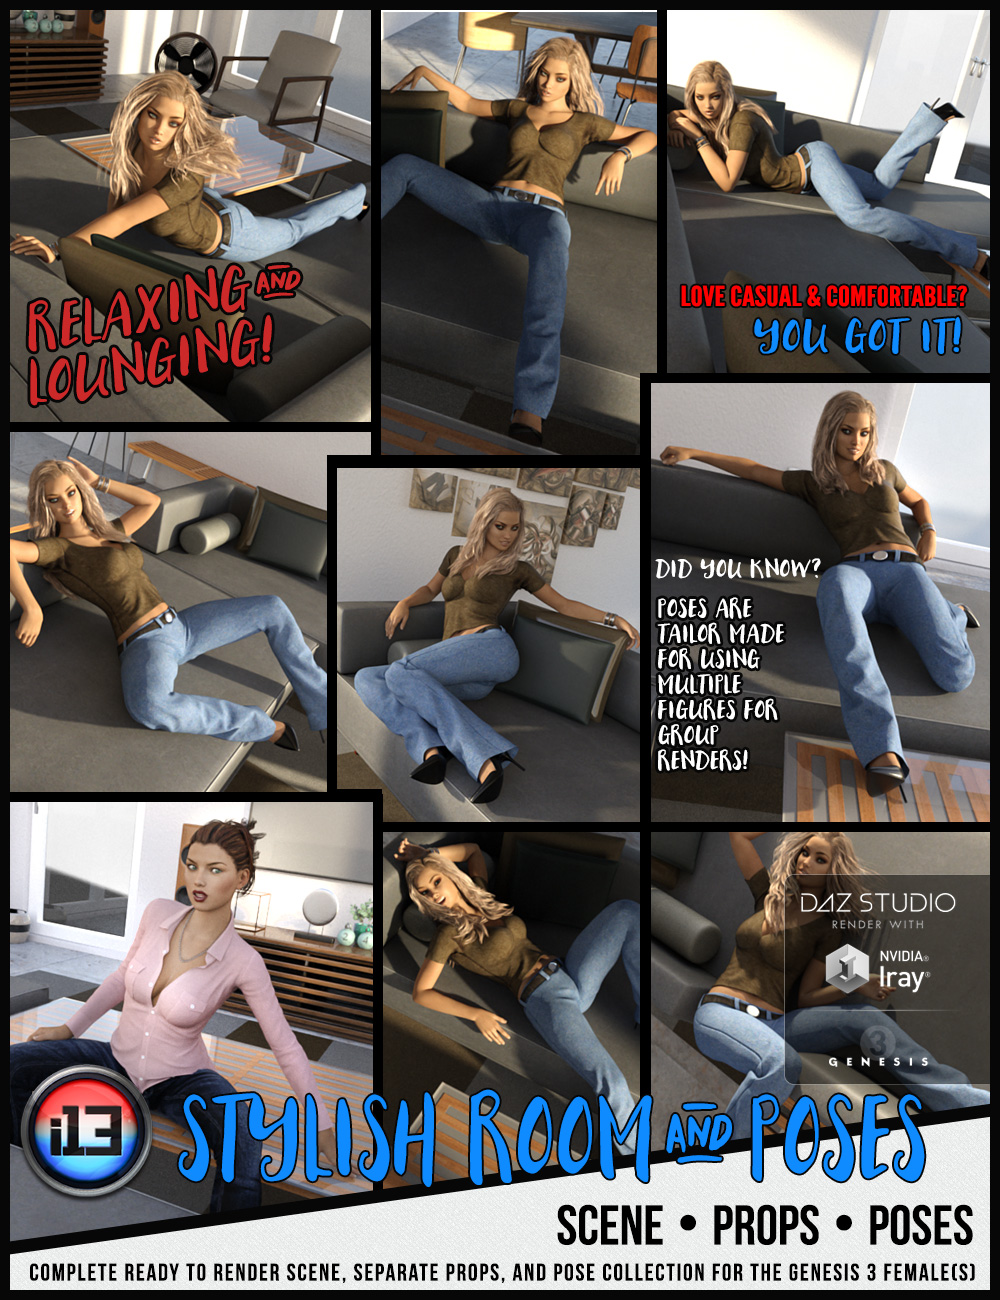 i13 Stylish Room and Poses by: ironman13, 3D Models by Daz 3D